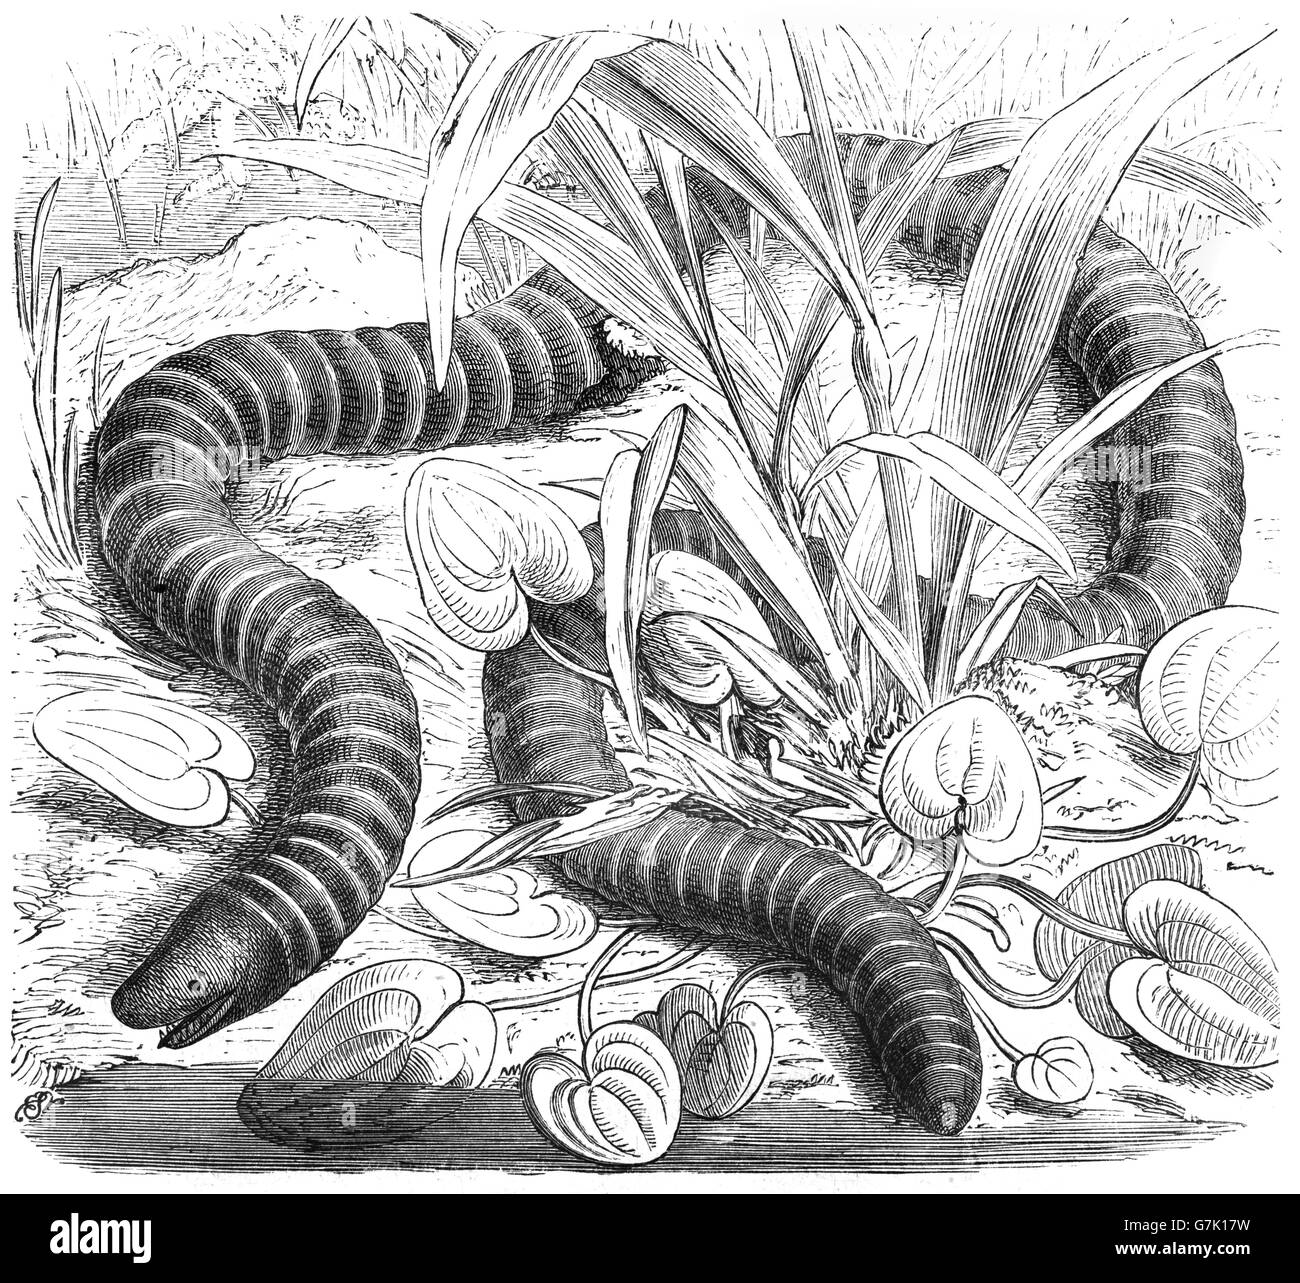 Ringed caecilian, Siphonops annulatus, amphibian, illustration from book dated 1904 Stock Photo